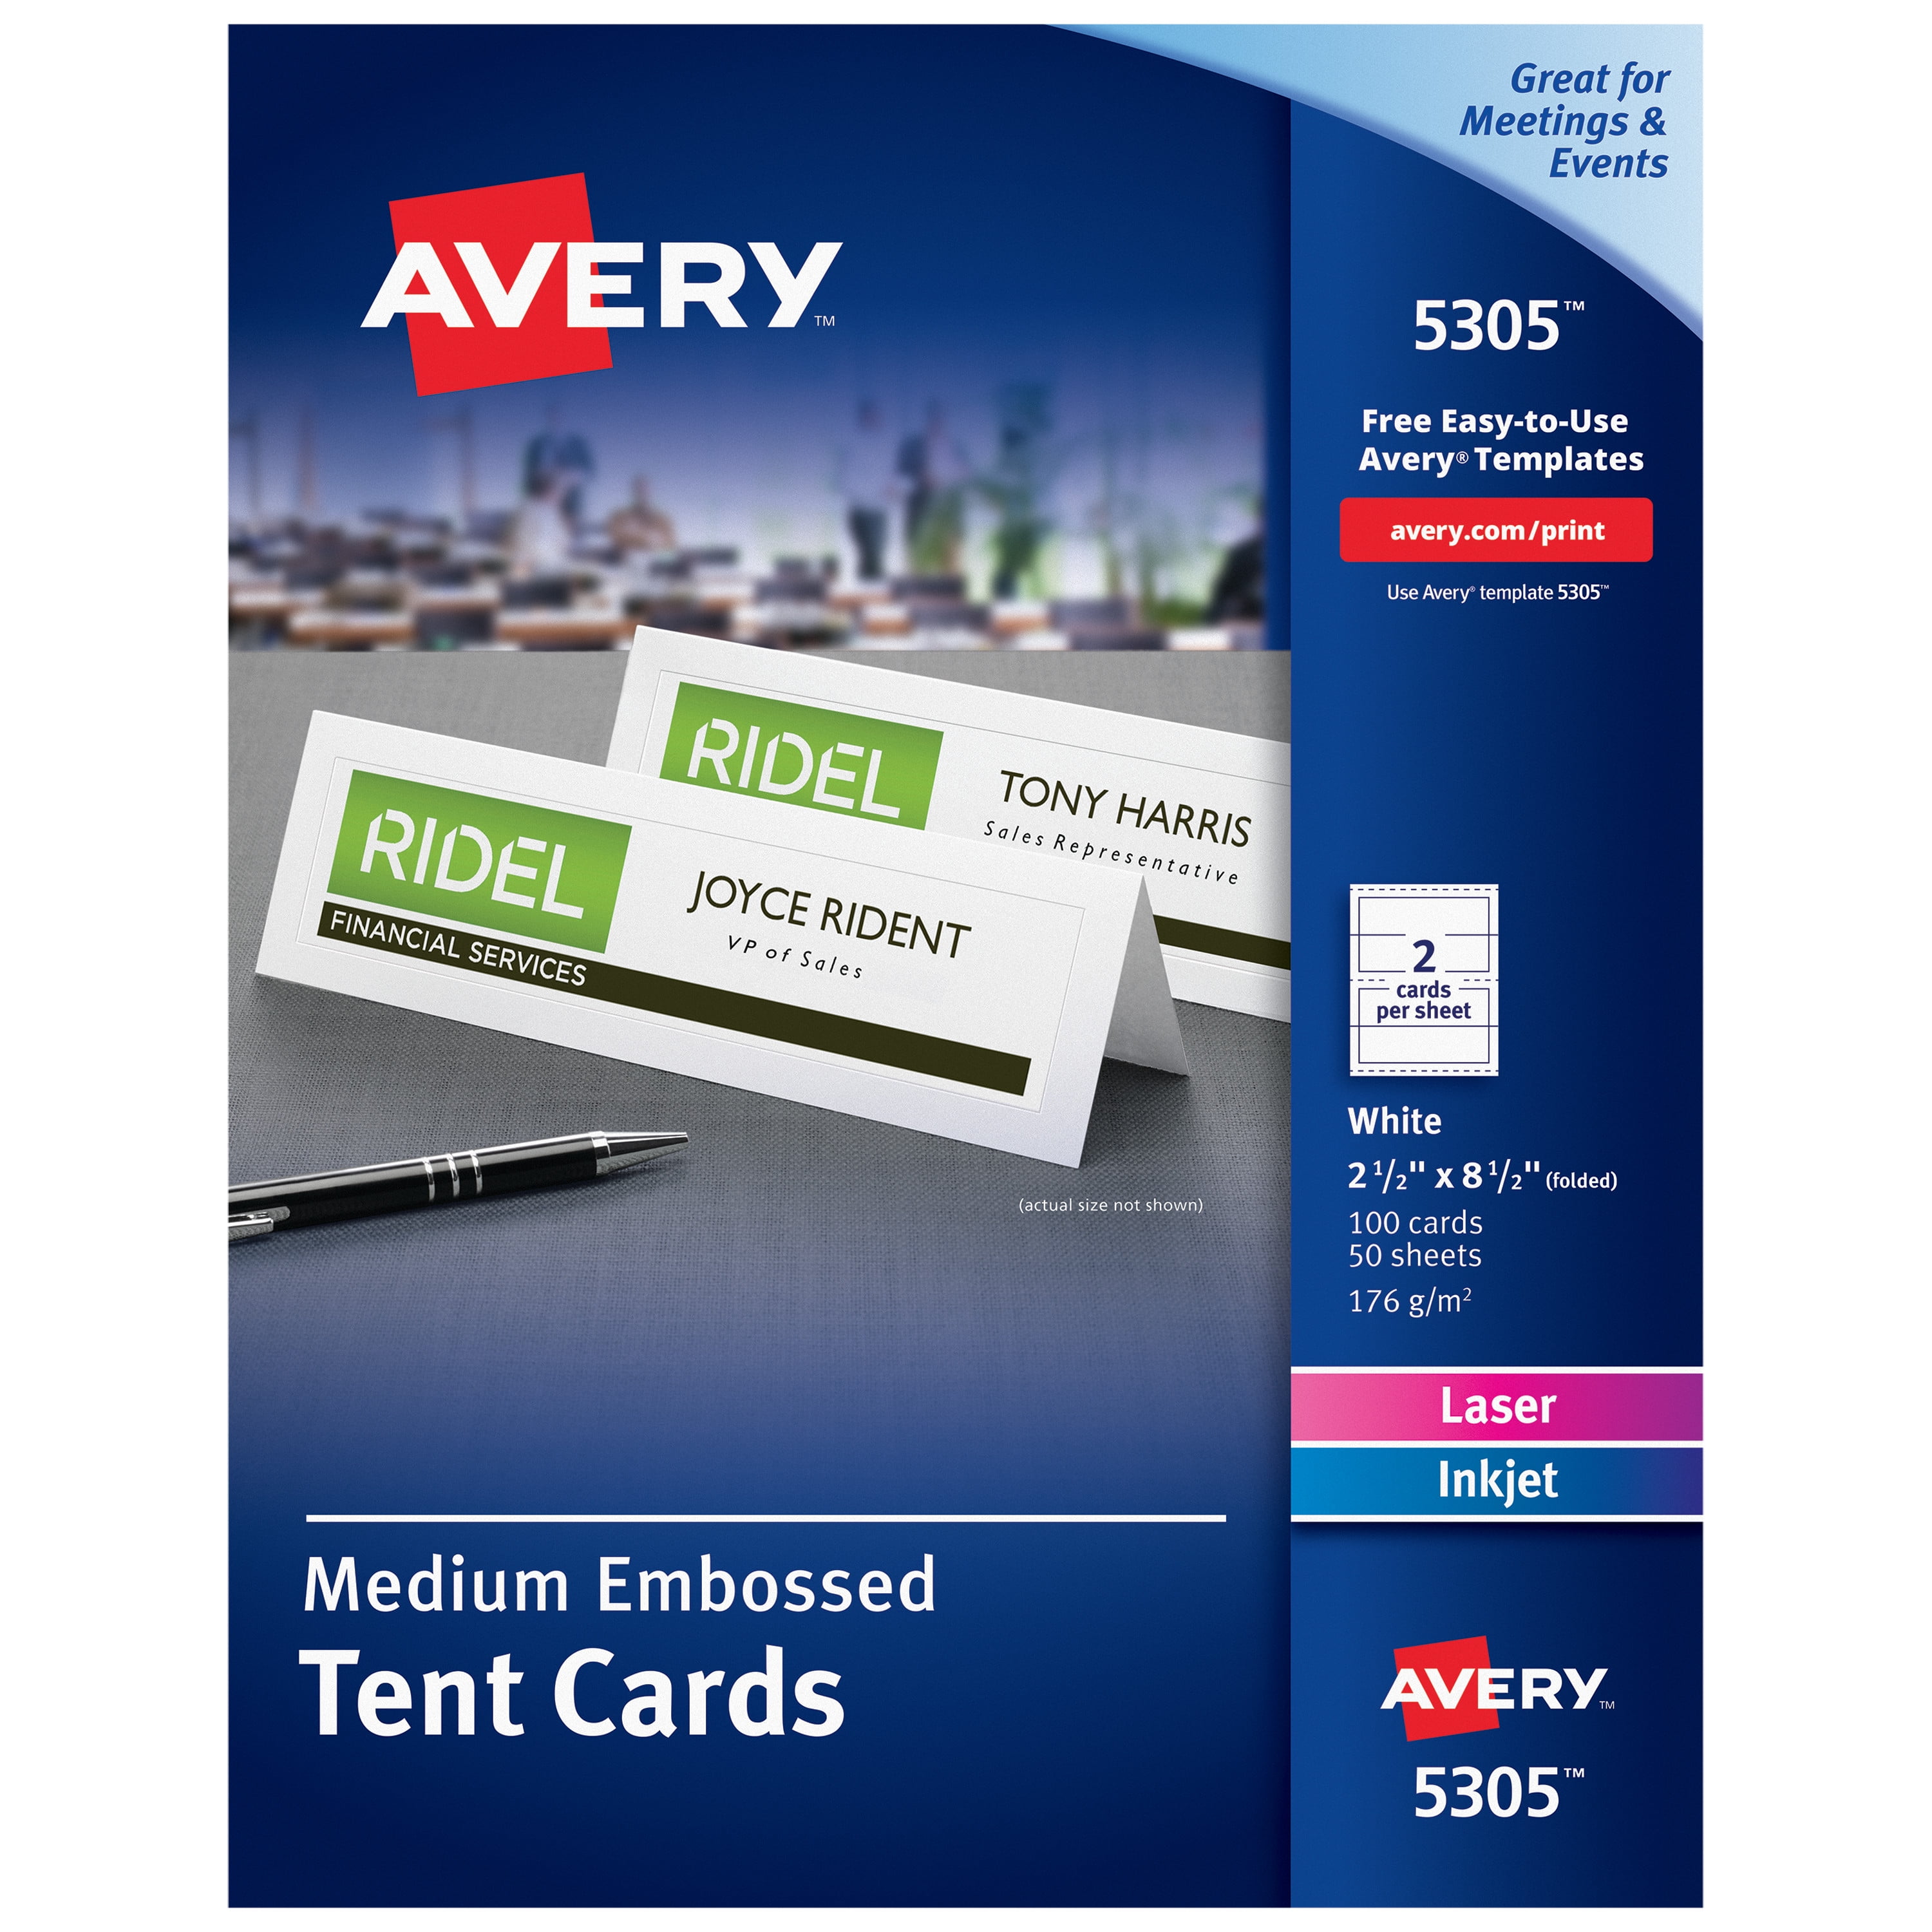 Avery Printable Tent Cards, Embossed, Uncoated, Two-Sided Printing, 2000-2000/2000"  x 200-2000/2000", 200000 Cards (20) In Free Printable Tent Card Template